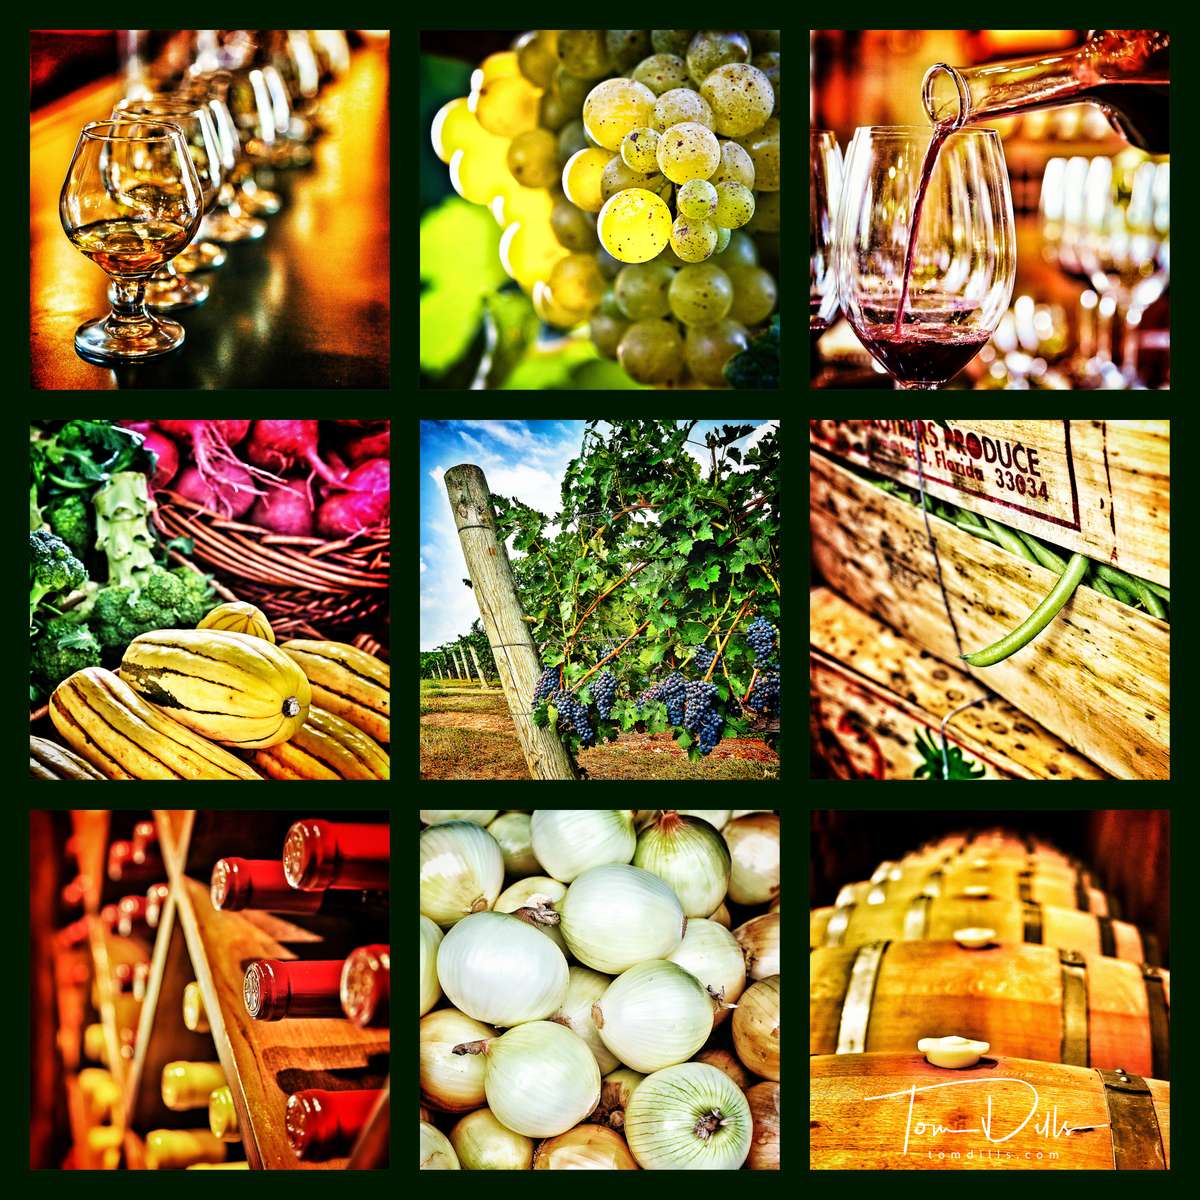 selected food and wine-related images printed as a 3x3 grid on 39x39{quote} canvas for a home in charlotte